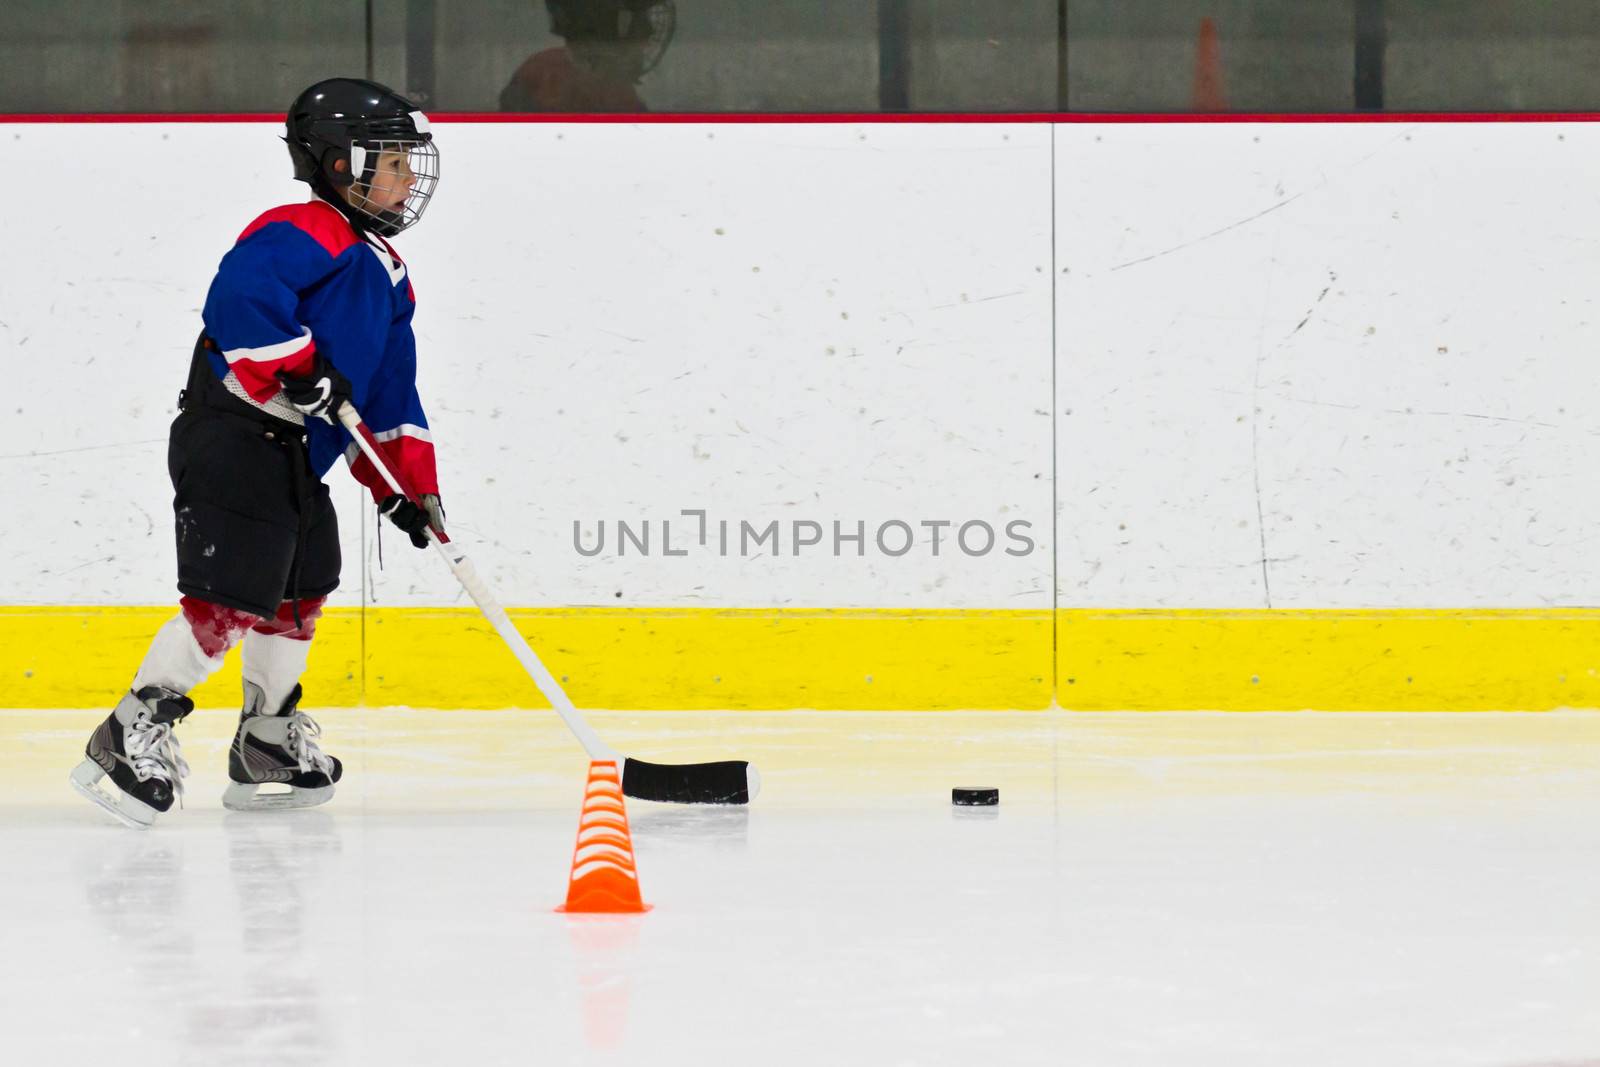 Child practices stickhandling at ice hockey practice by bigjohn36